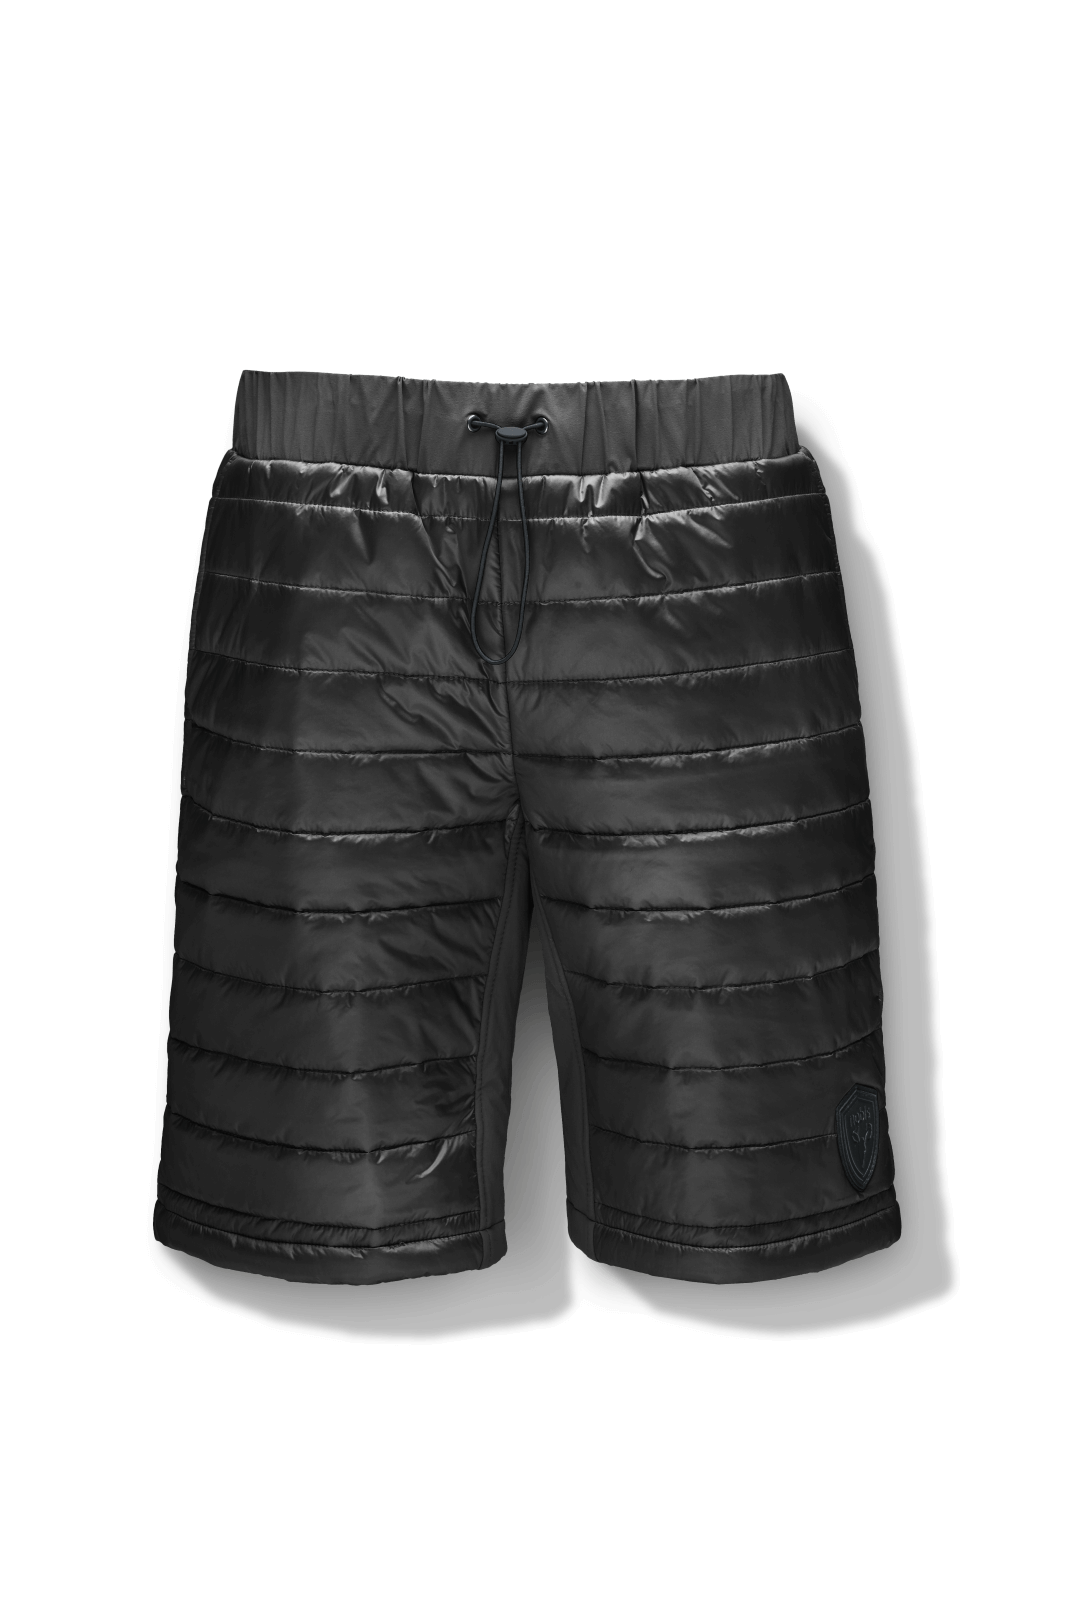 Decker Men's Performance Quilted Shorts in knee length, premium cire technical nylon taffeta and stretch nylon fabrication, premium 4-way stretch, water-resistant Primaloft Gold Insulation Active+, side seam pockets, invisible zipper back pokcet, elasticized waist with drawcords, and hidden drawcord at leg hems, in Black